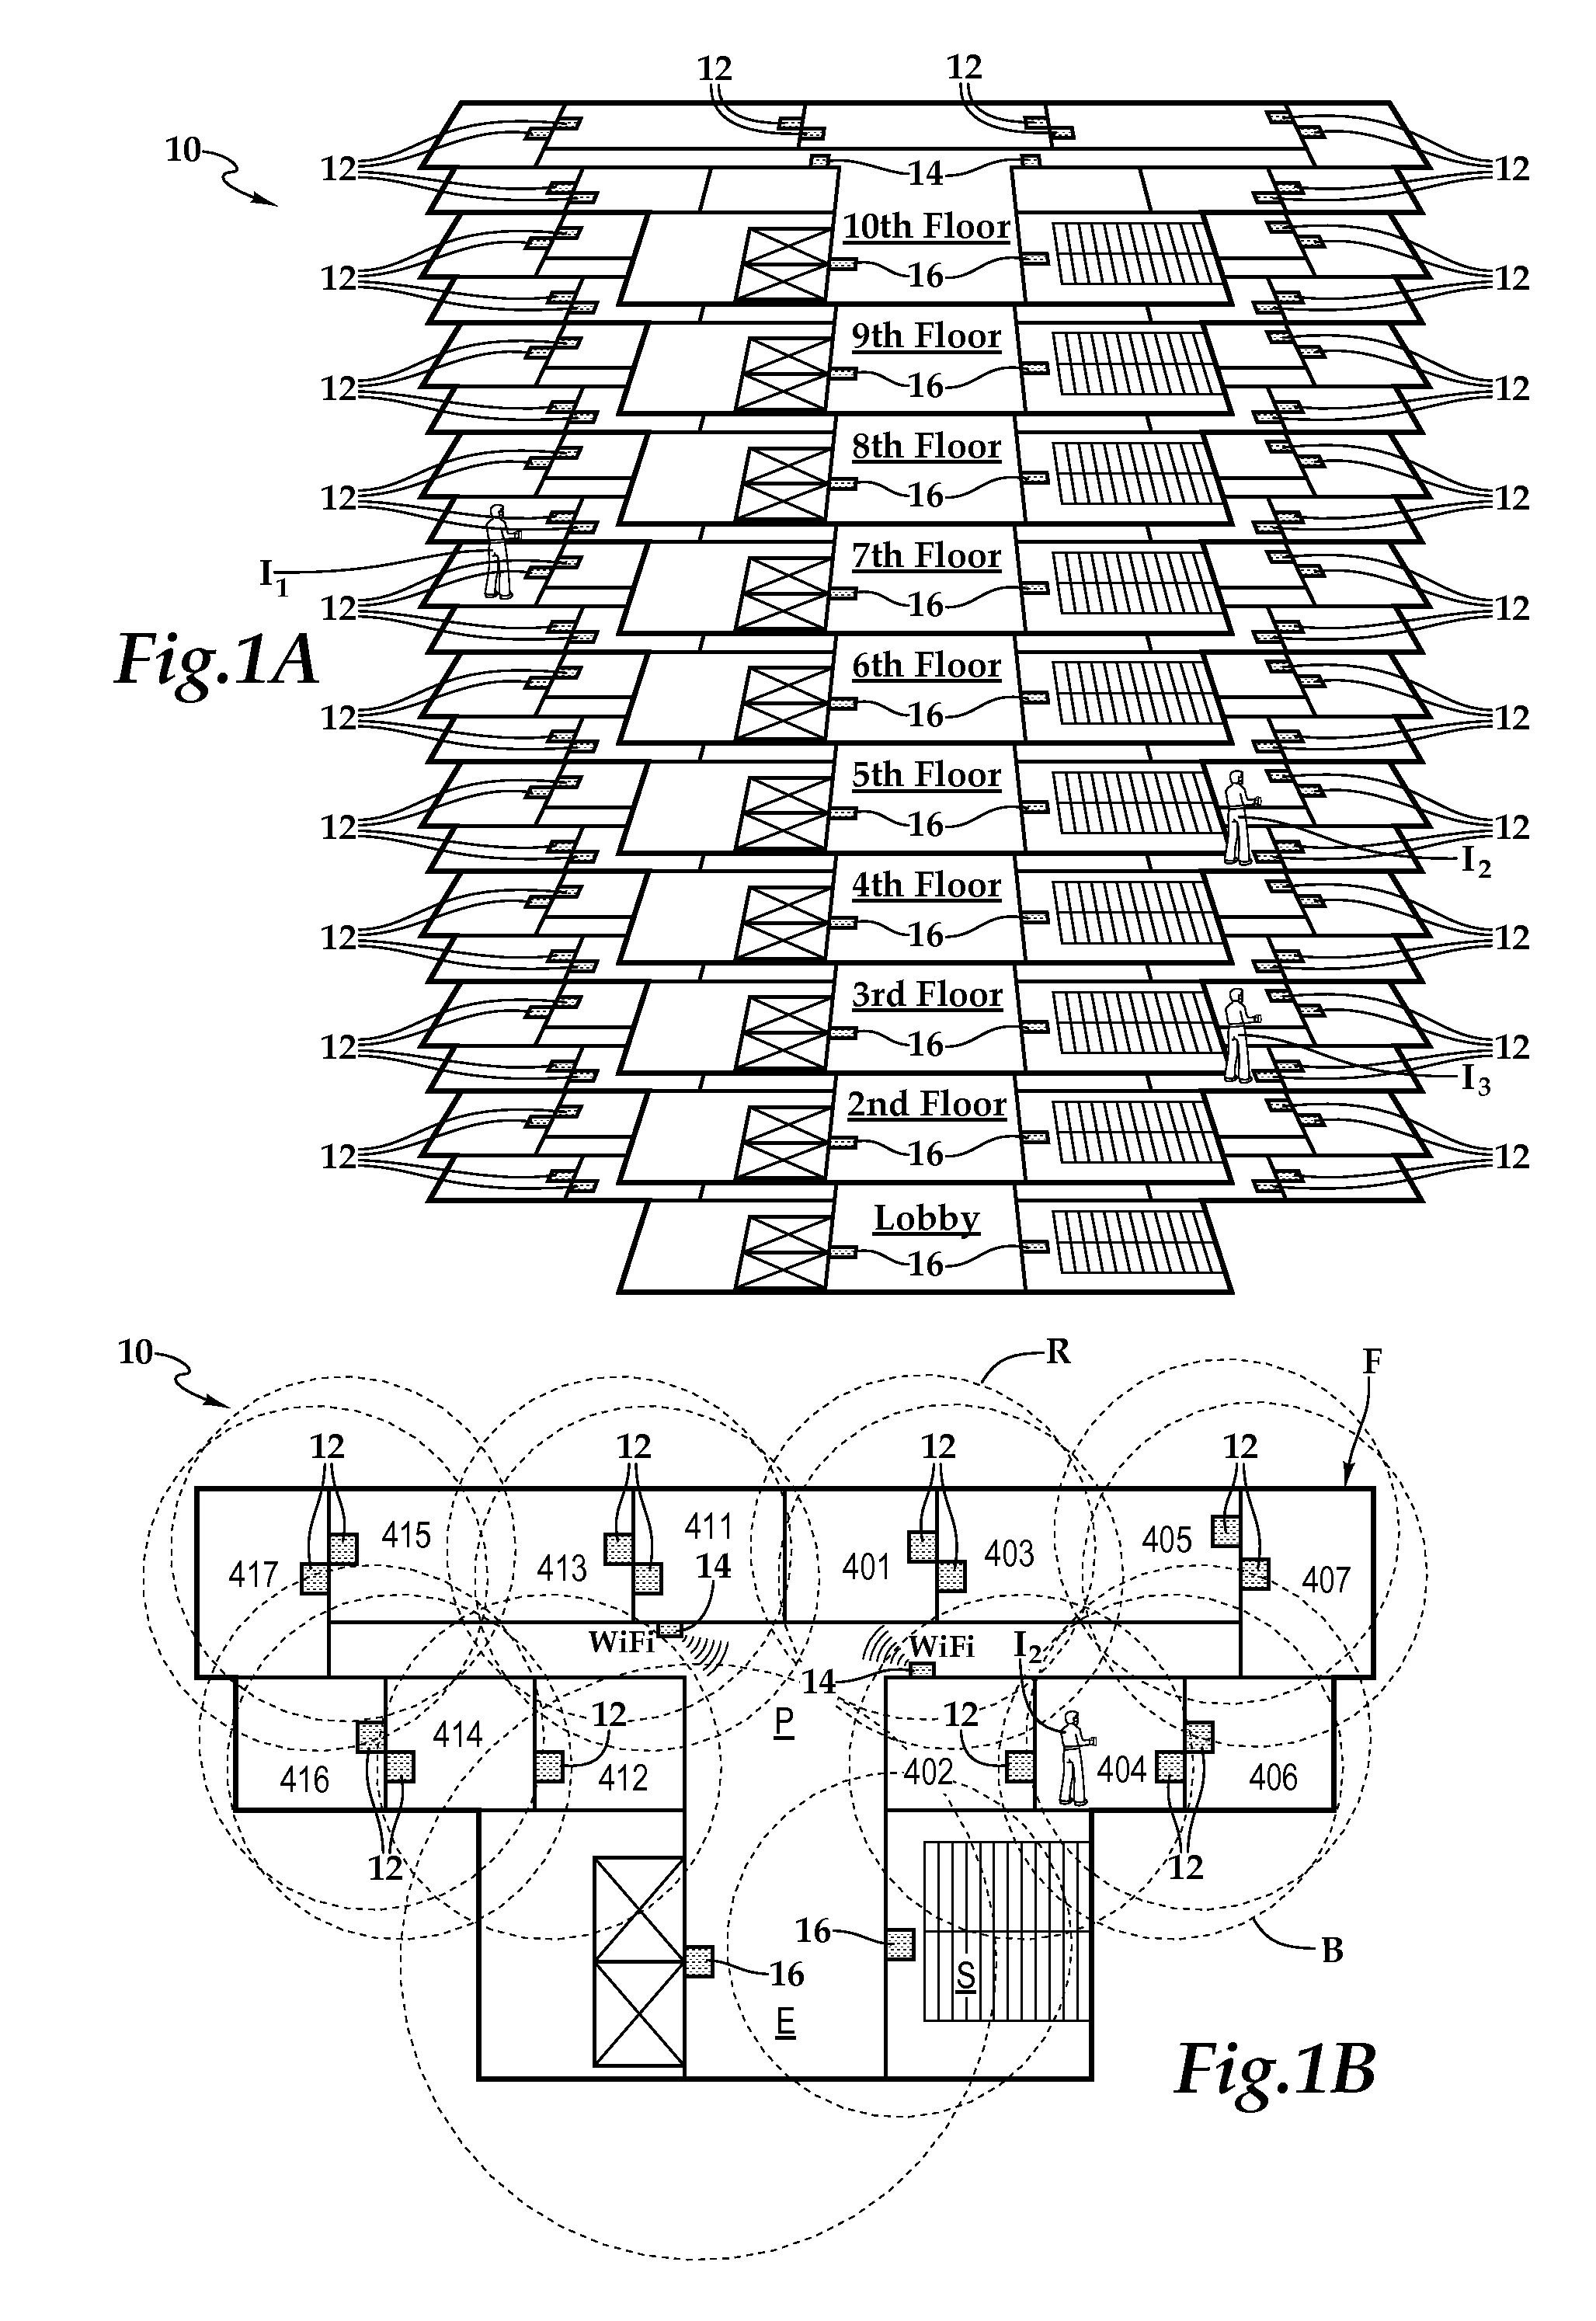 Set-top box, system and method for providing awareness in a hospitality environment